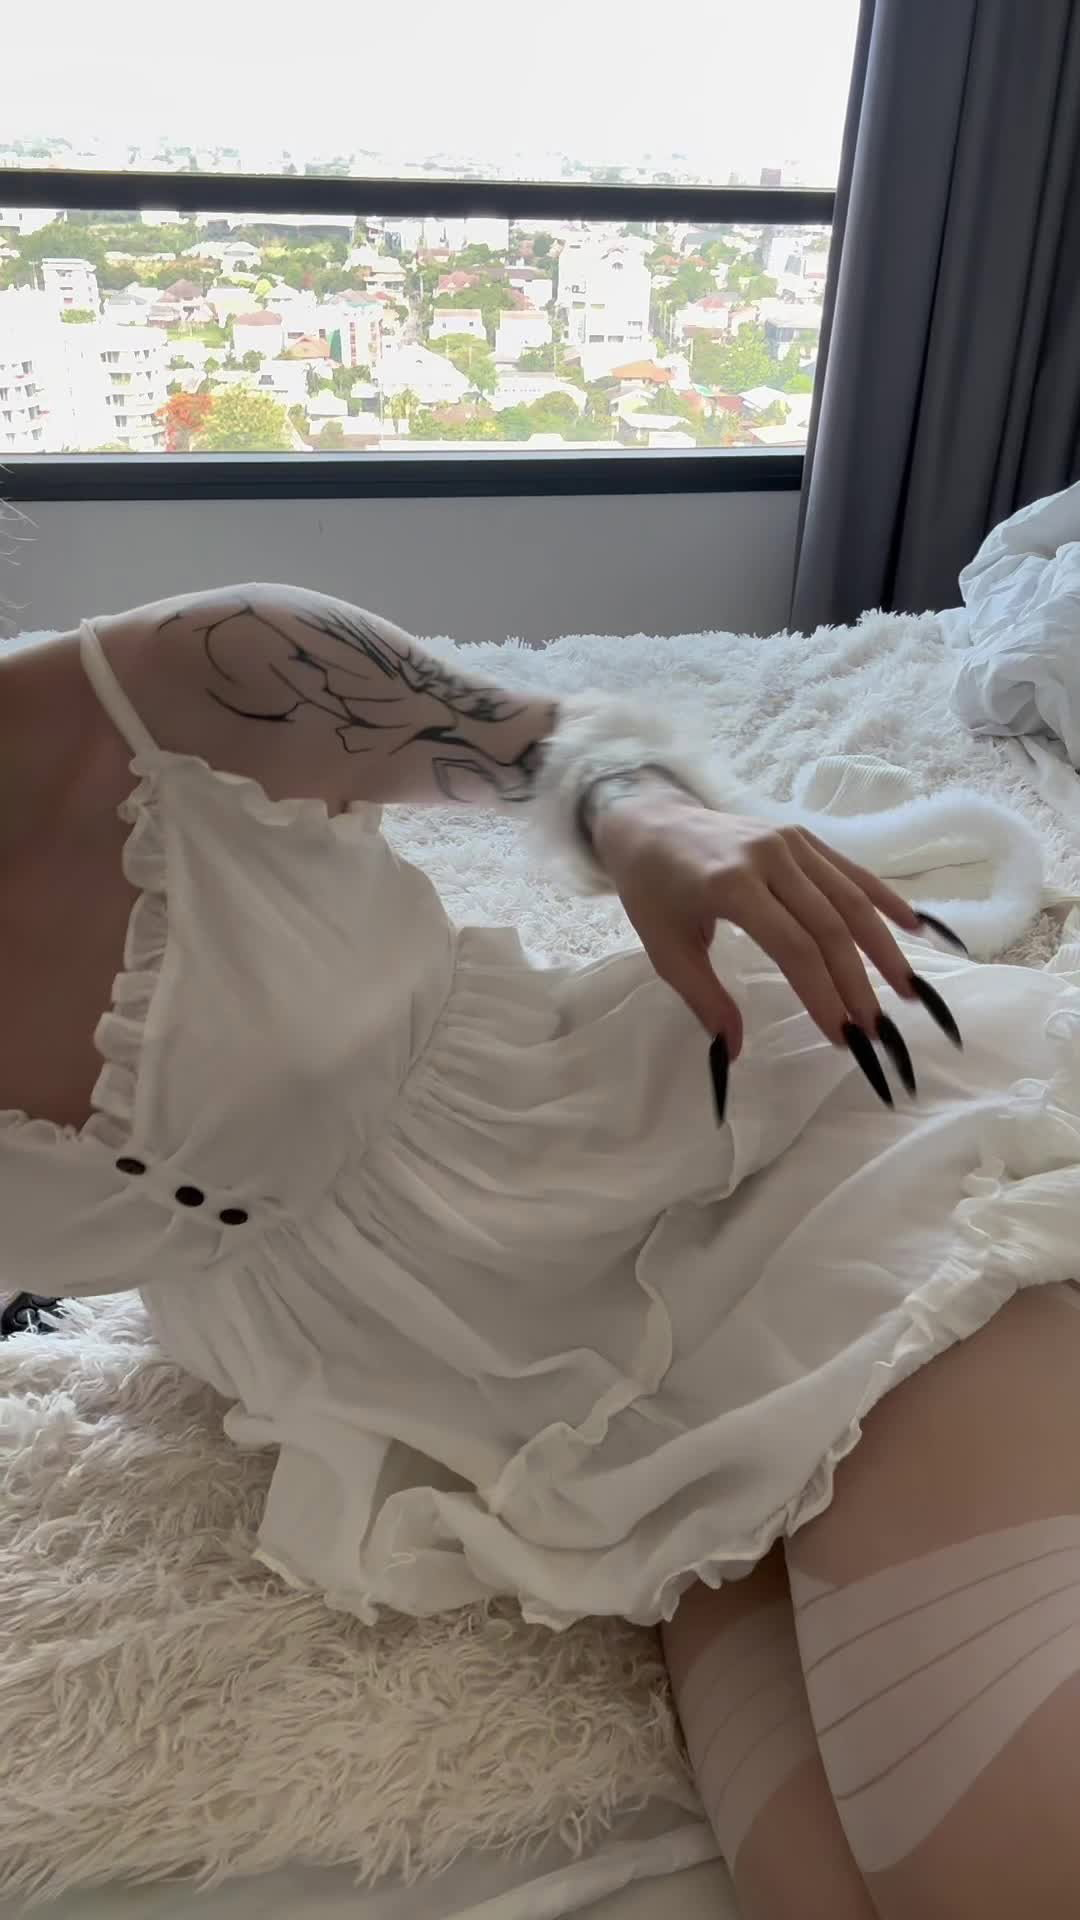 Video post by tinyjoyy